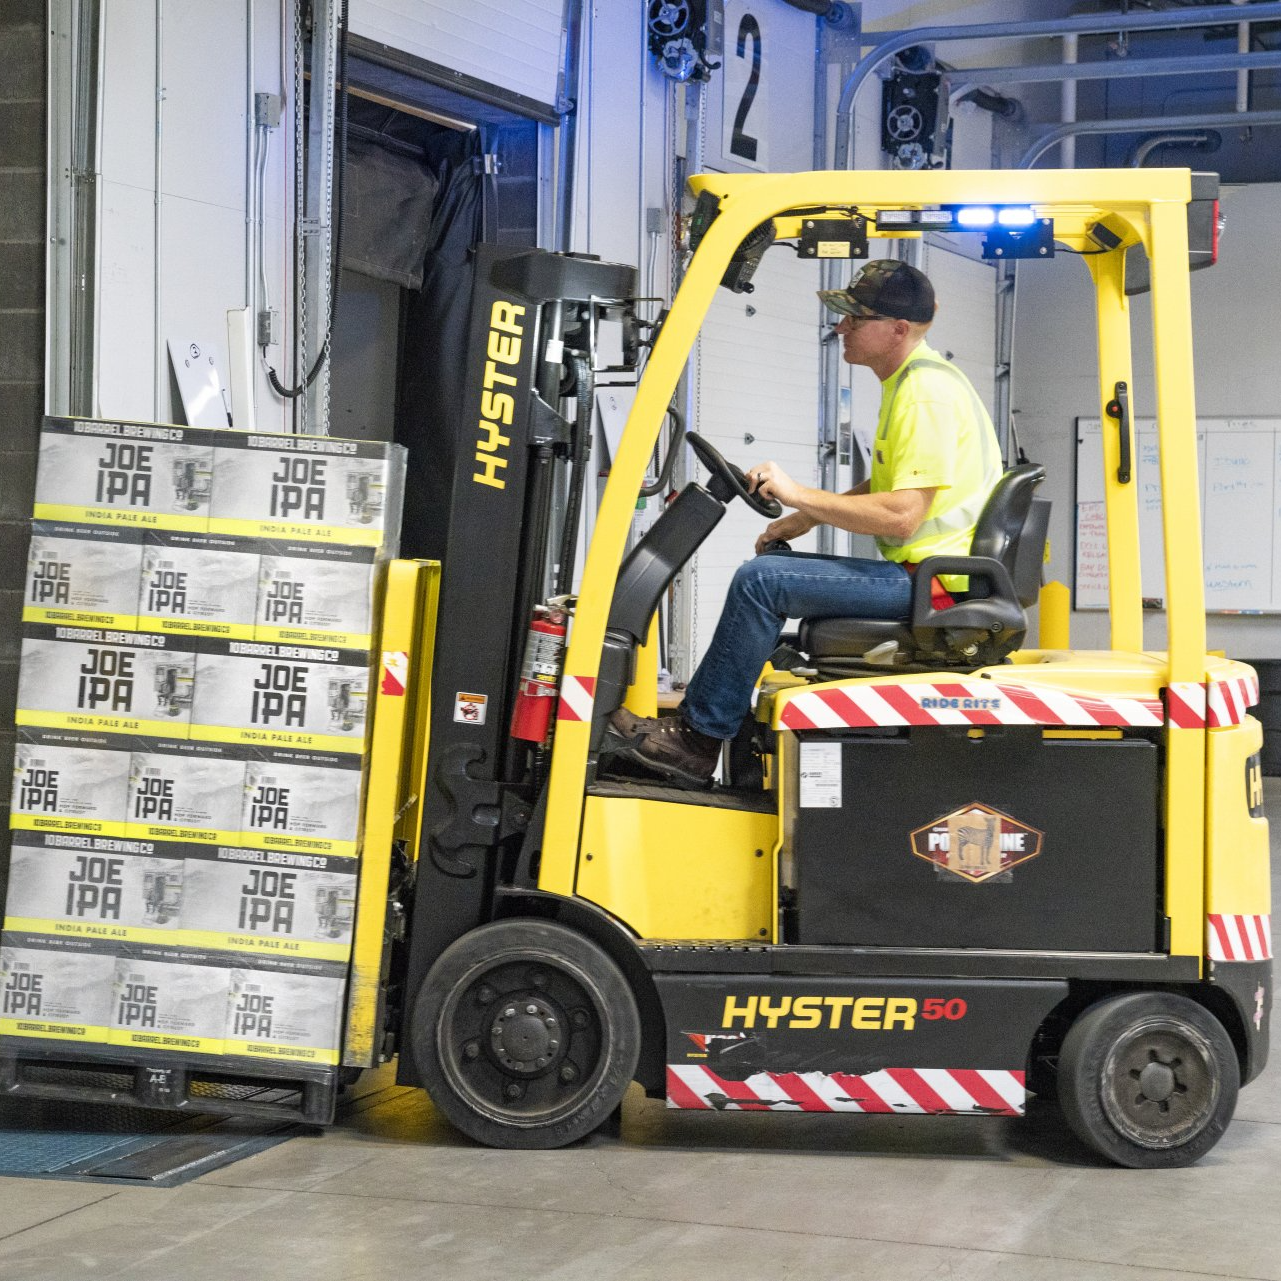 A forklift lifting a pallet of drinks